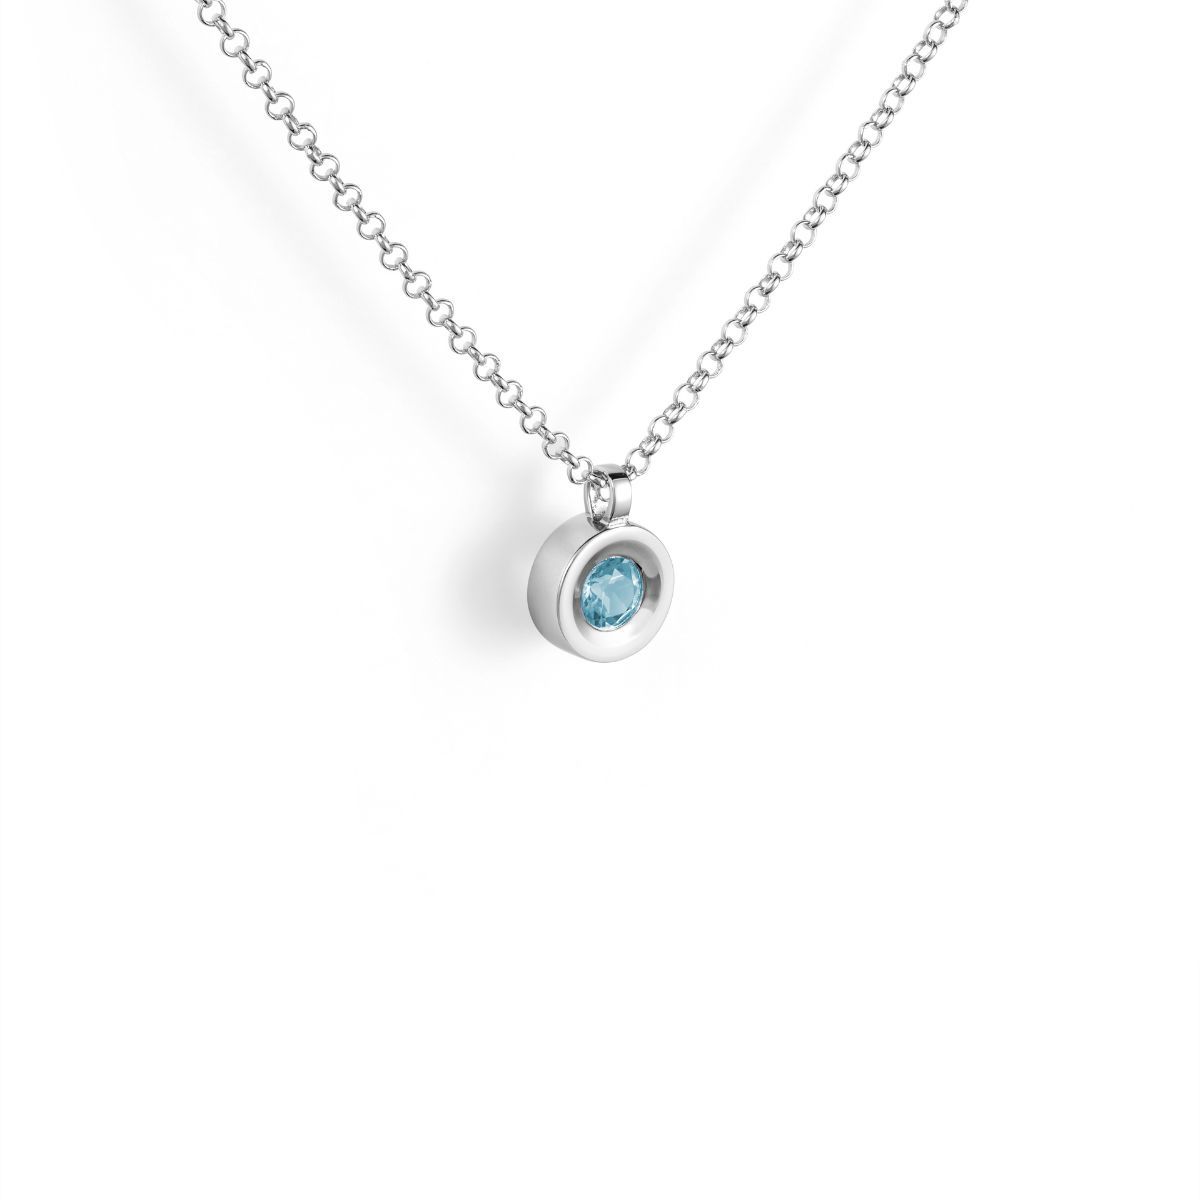 SMALL SILVER AND NATURAL BLUE TOPAZ PENDANT